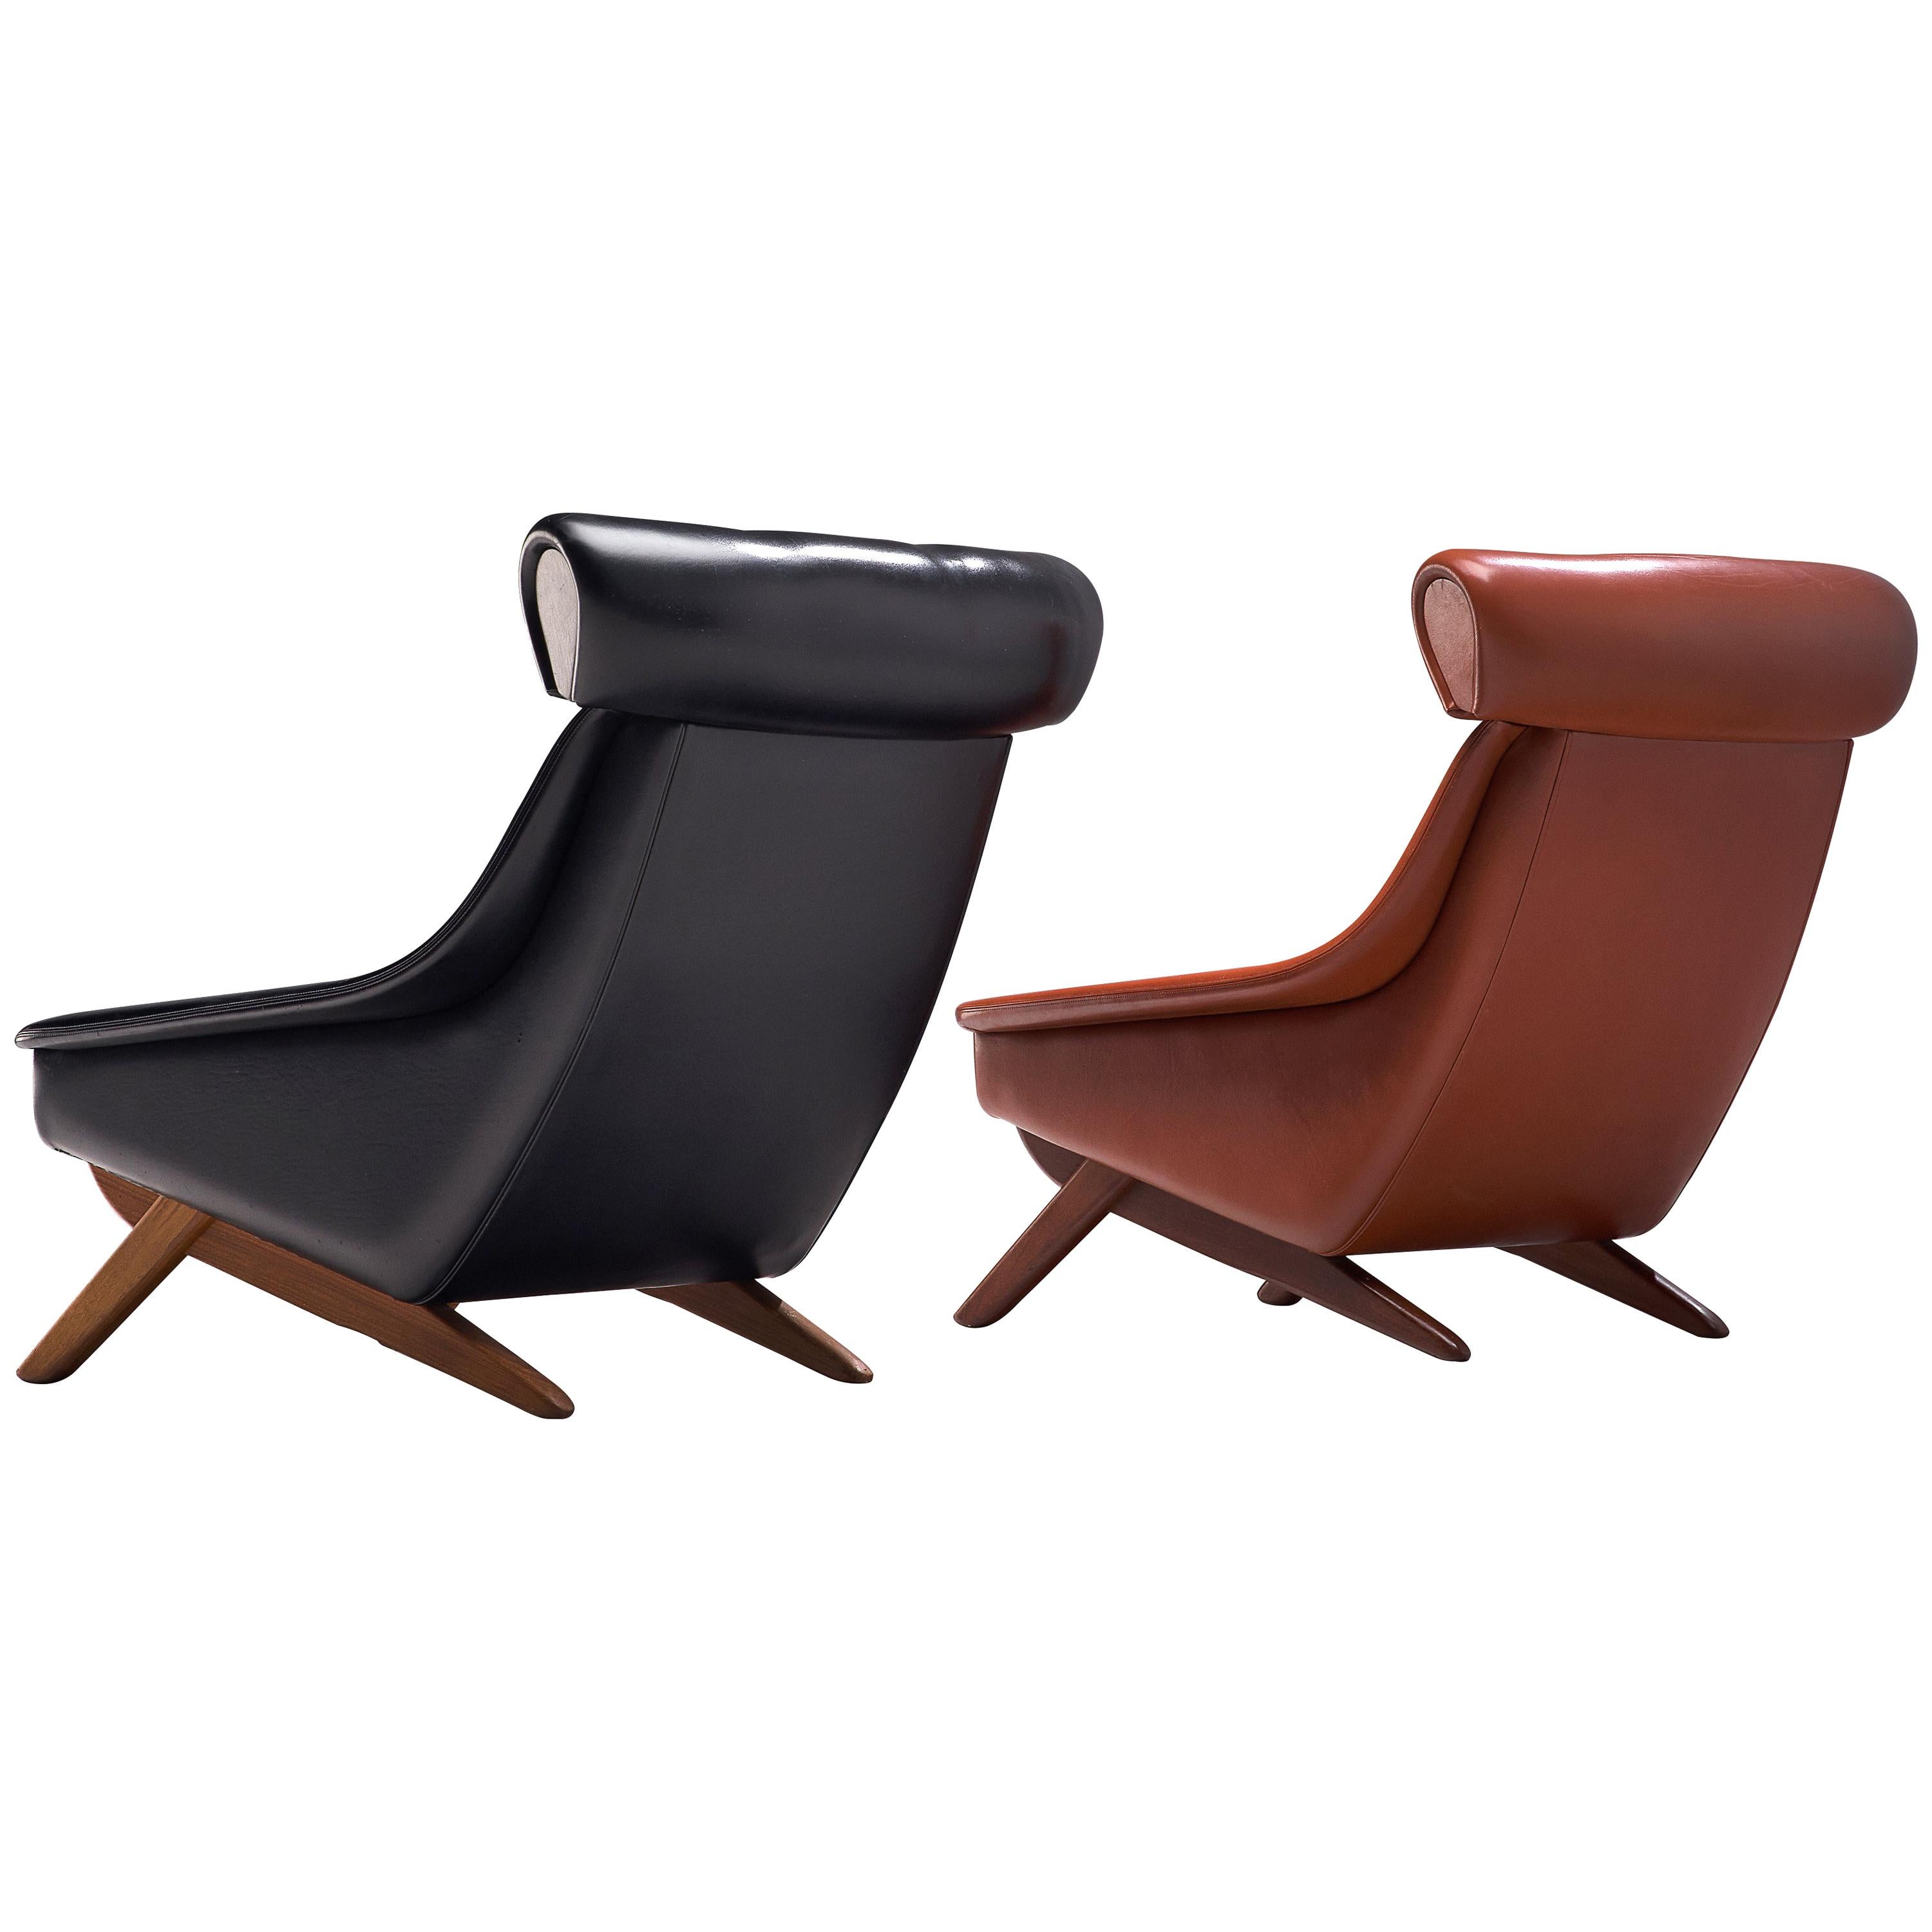 Illum Wikkelsø 'Ox' Lounge Chairs in Red and Black Leatherette